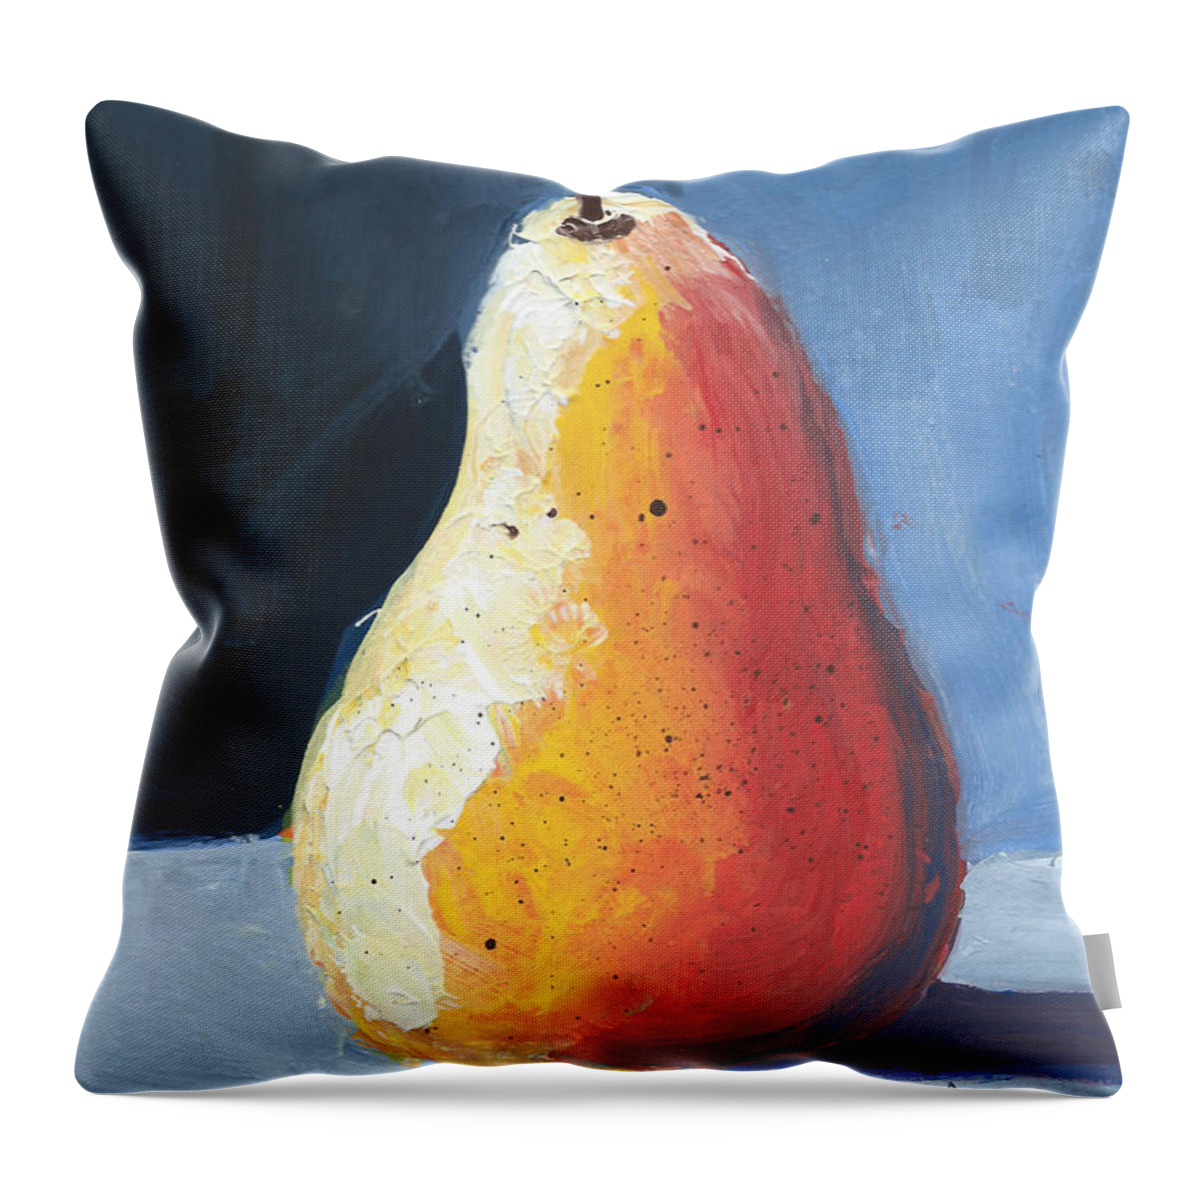 Pear Throw Pillow featuring the painting Pear 5 by Elise Boam